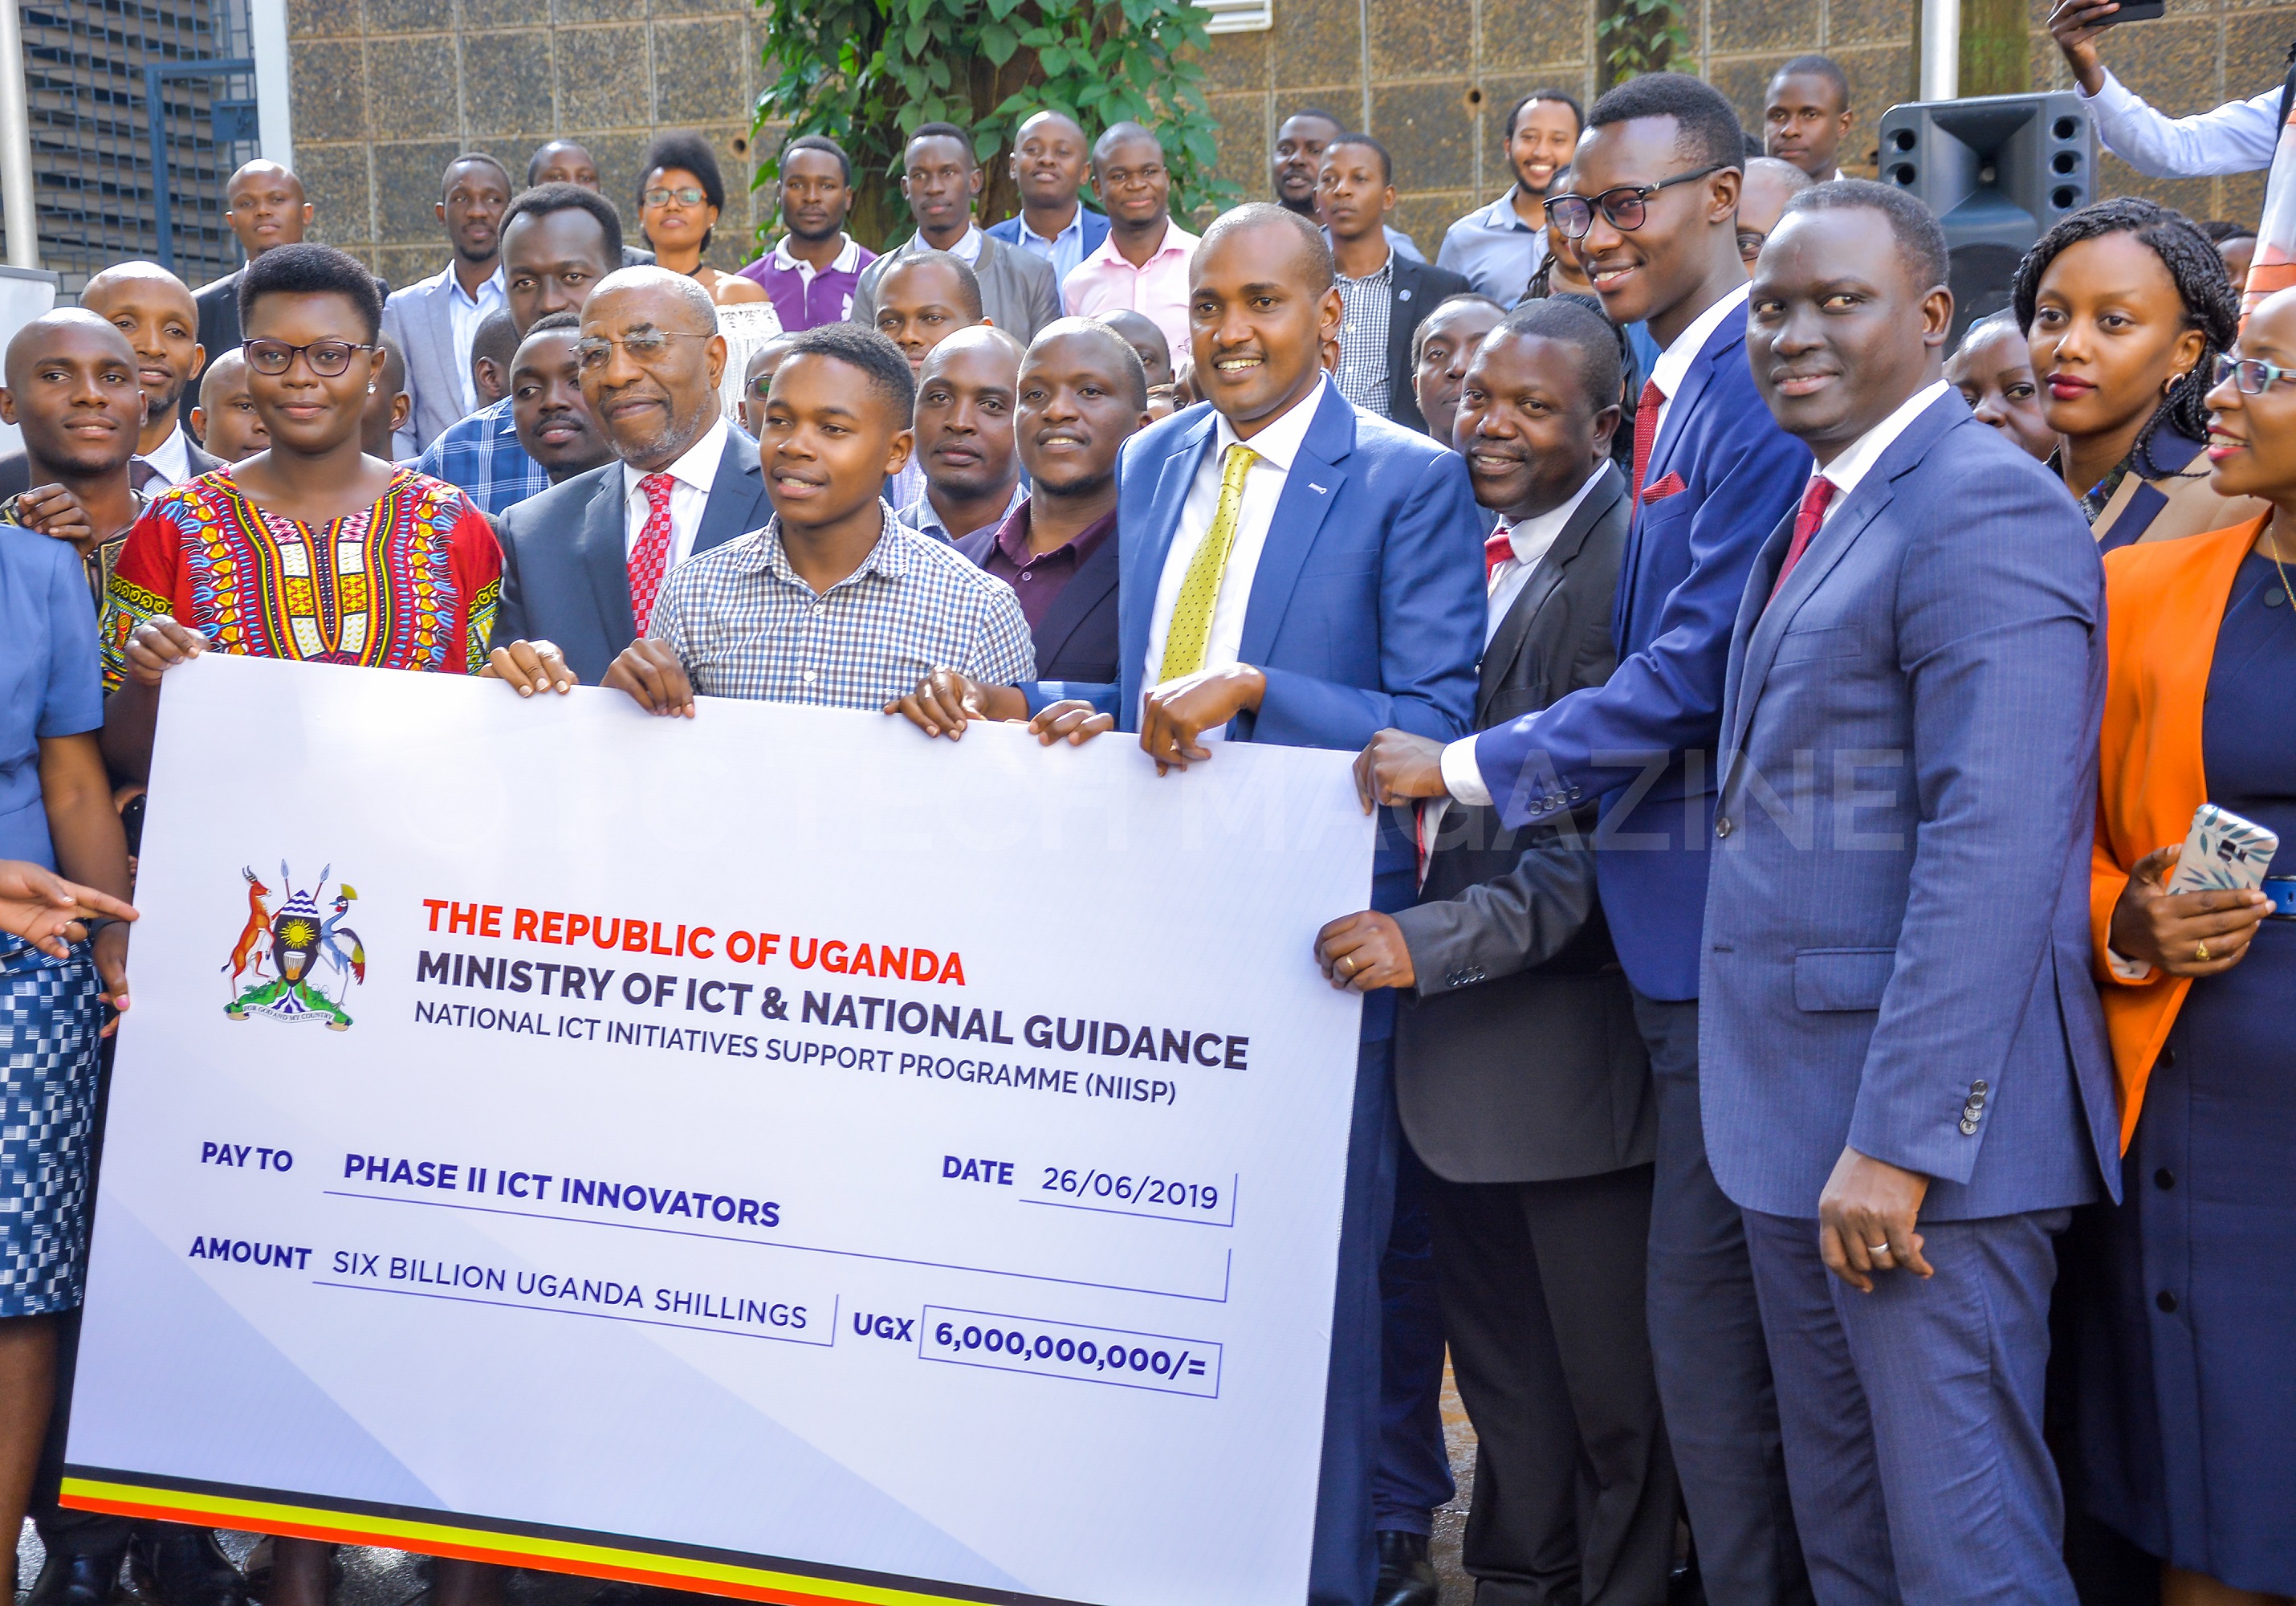 Rt. Hon. Ruhakana Rugunda and Hon. Frank Tumwebaze, on Wednesday officially handed over a shared UGX6 billion grant to the second cohort winners of the National ICT Initiatives Support Programme (NIISP). Photo by: OLUPOT NATHAN ERNEST/PC TECH MAGAZINE